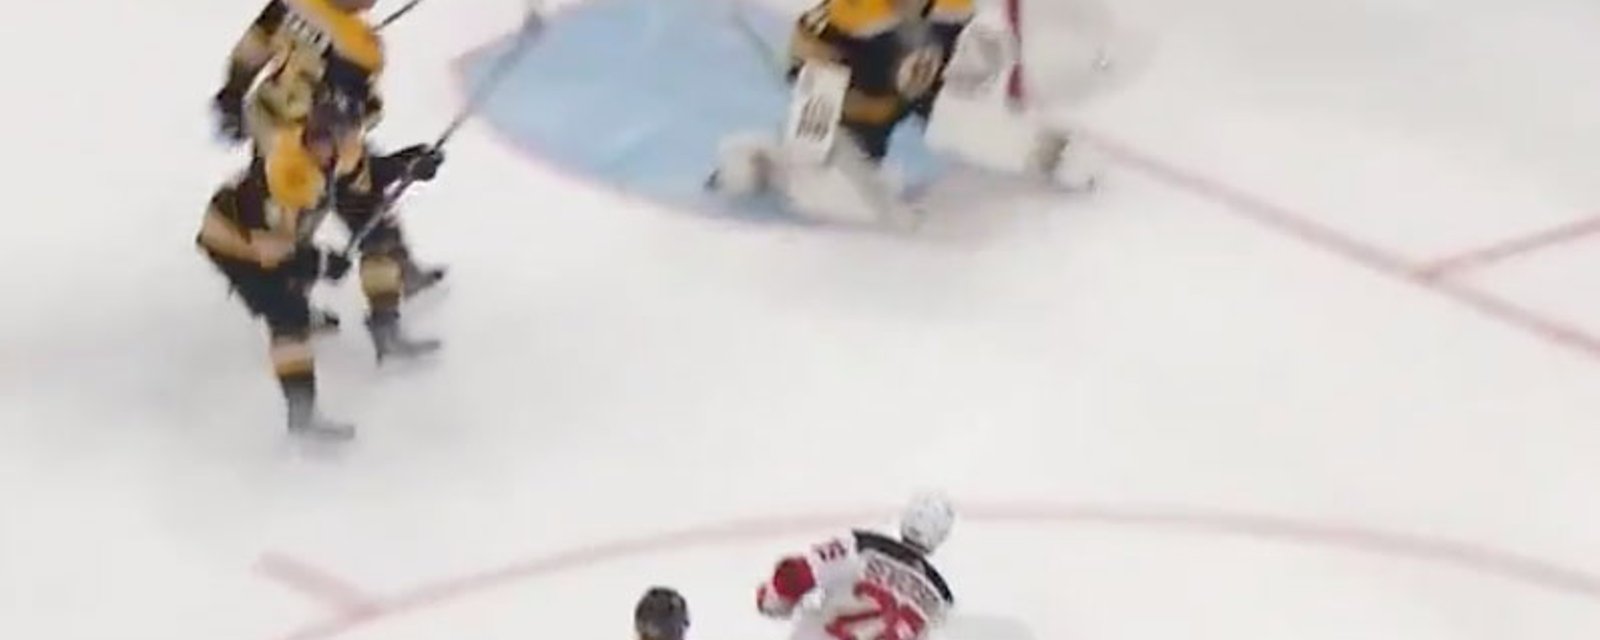 Two Devils defensemen make Bruins look like fools 25 seconds into the game! 